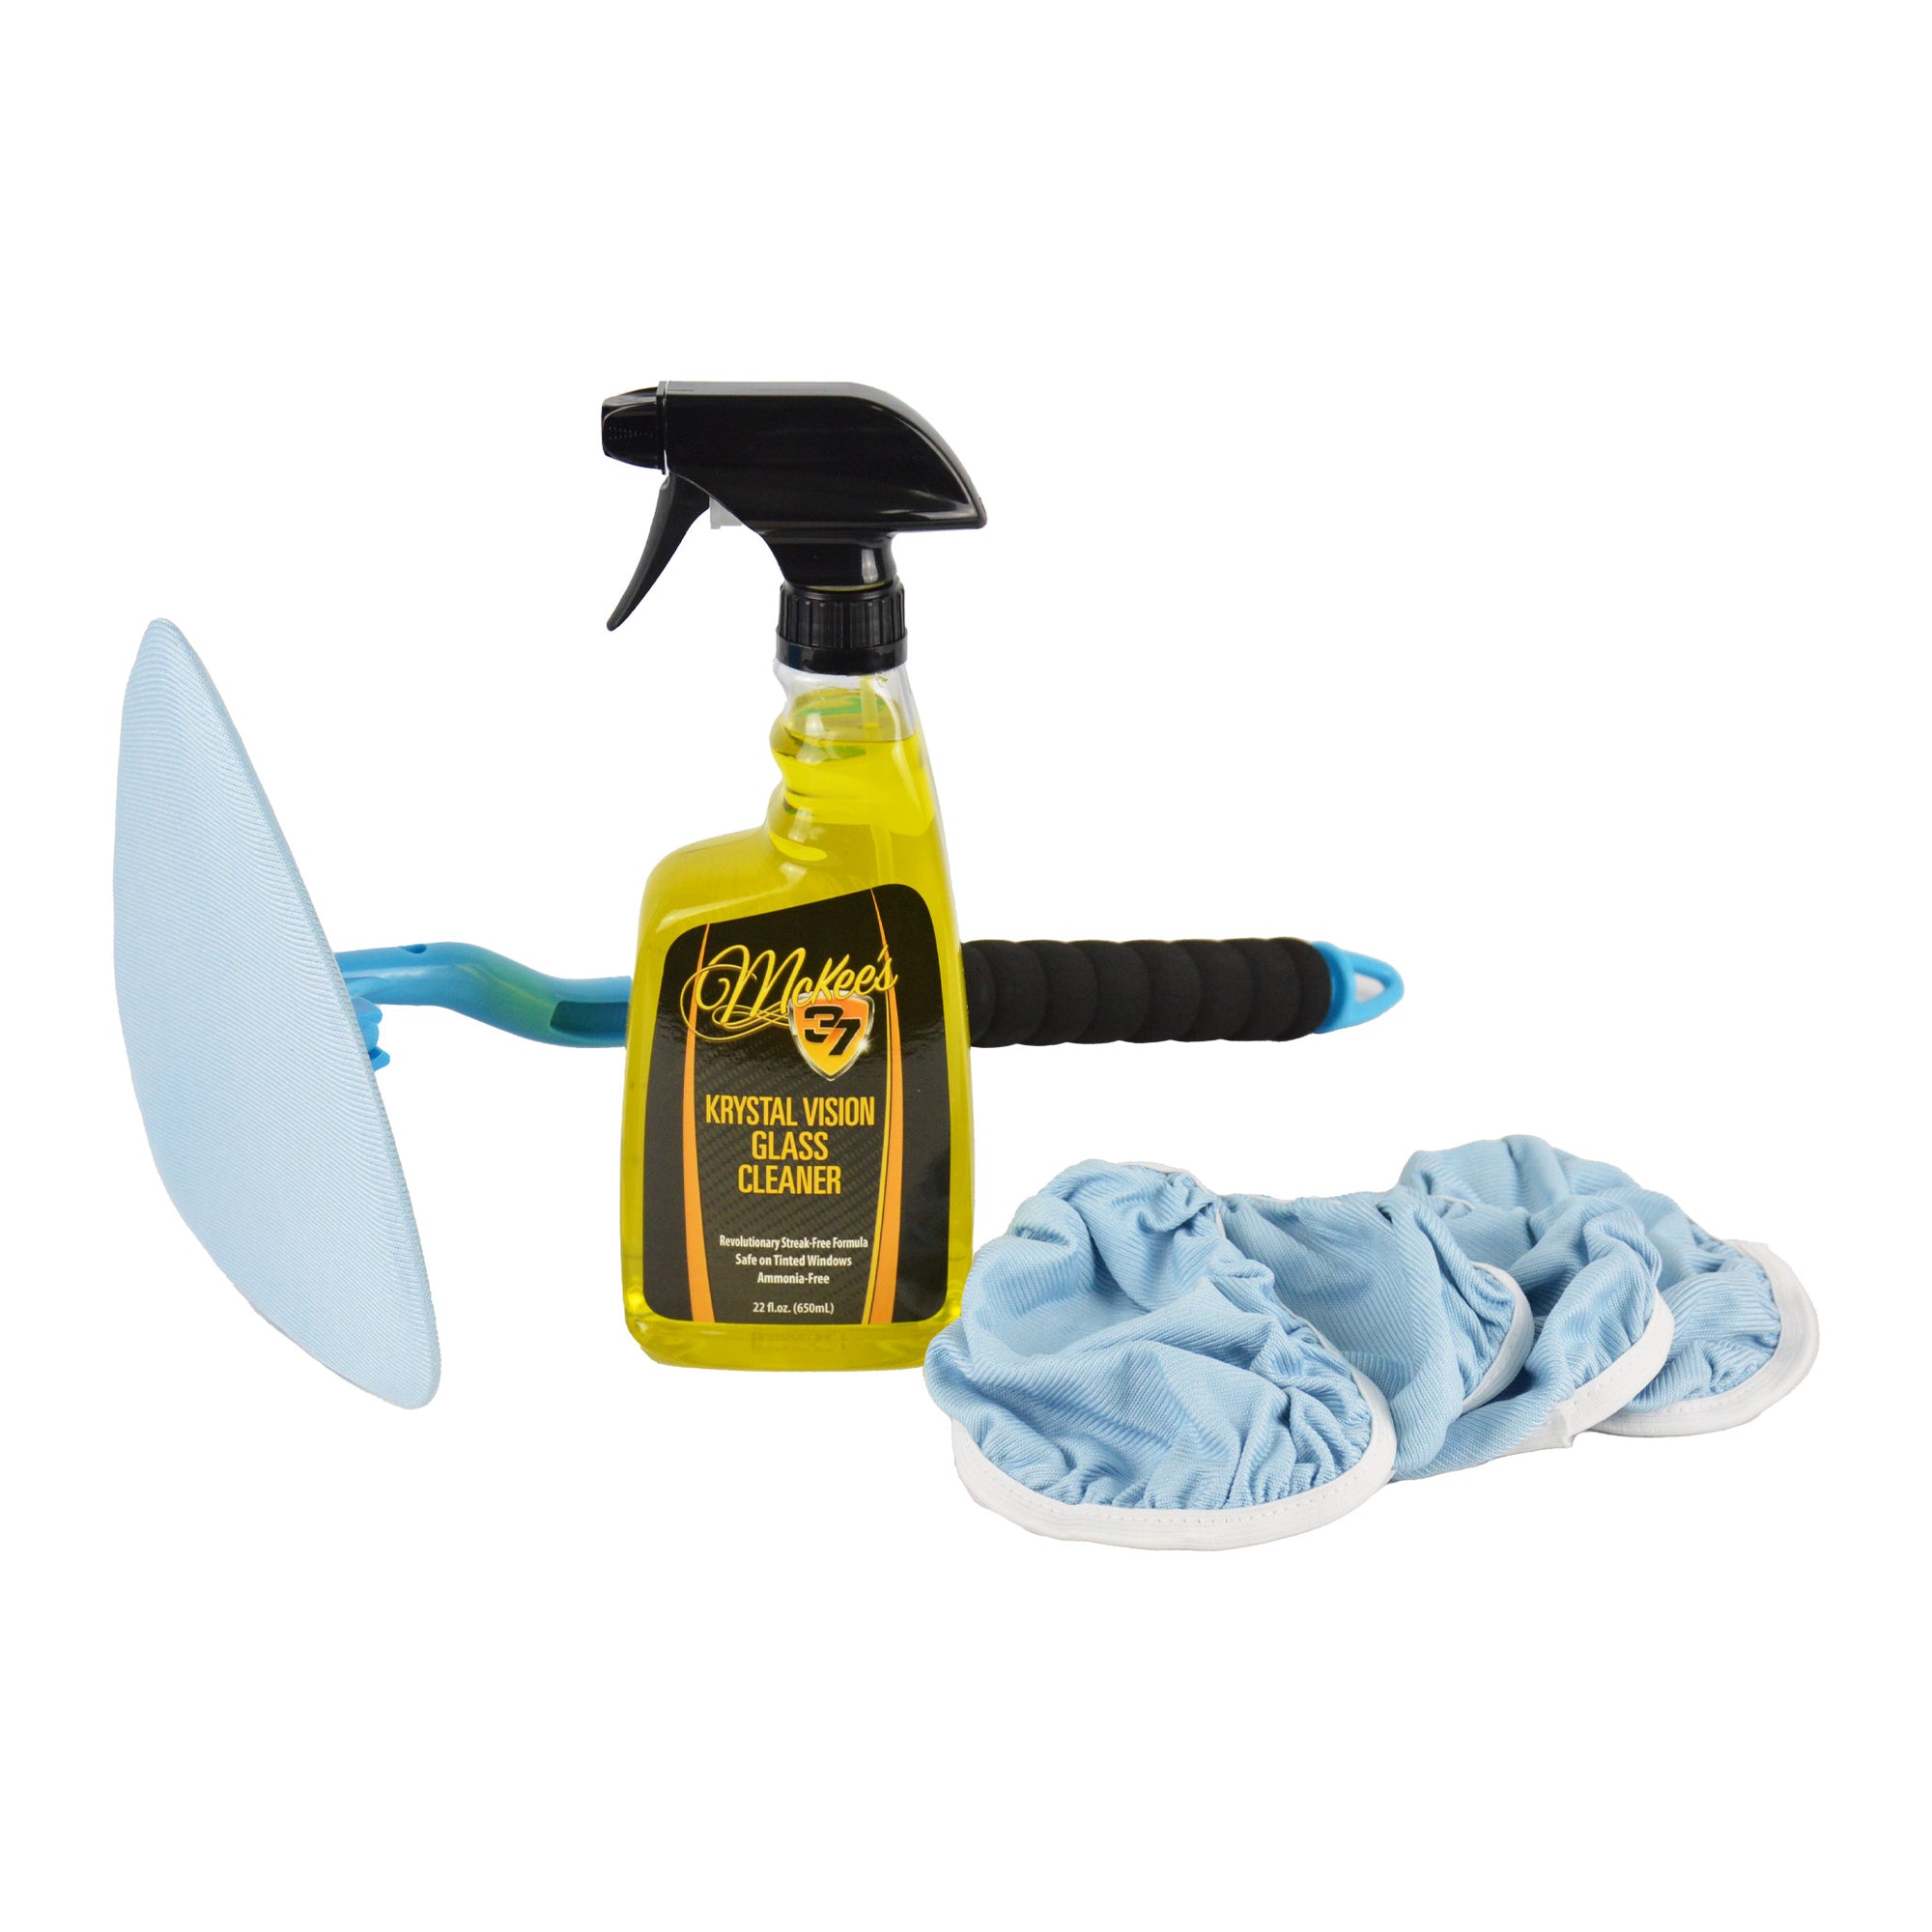 Glass Master Car Window Cleaning Kit GMU1 for hard to reach areas